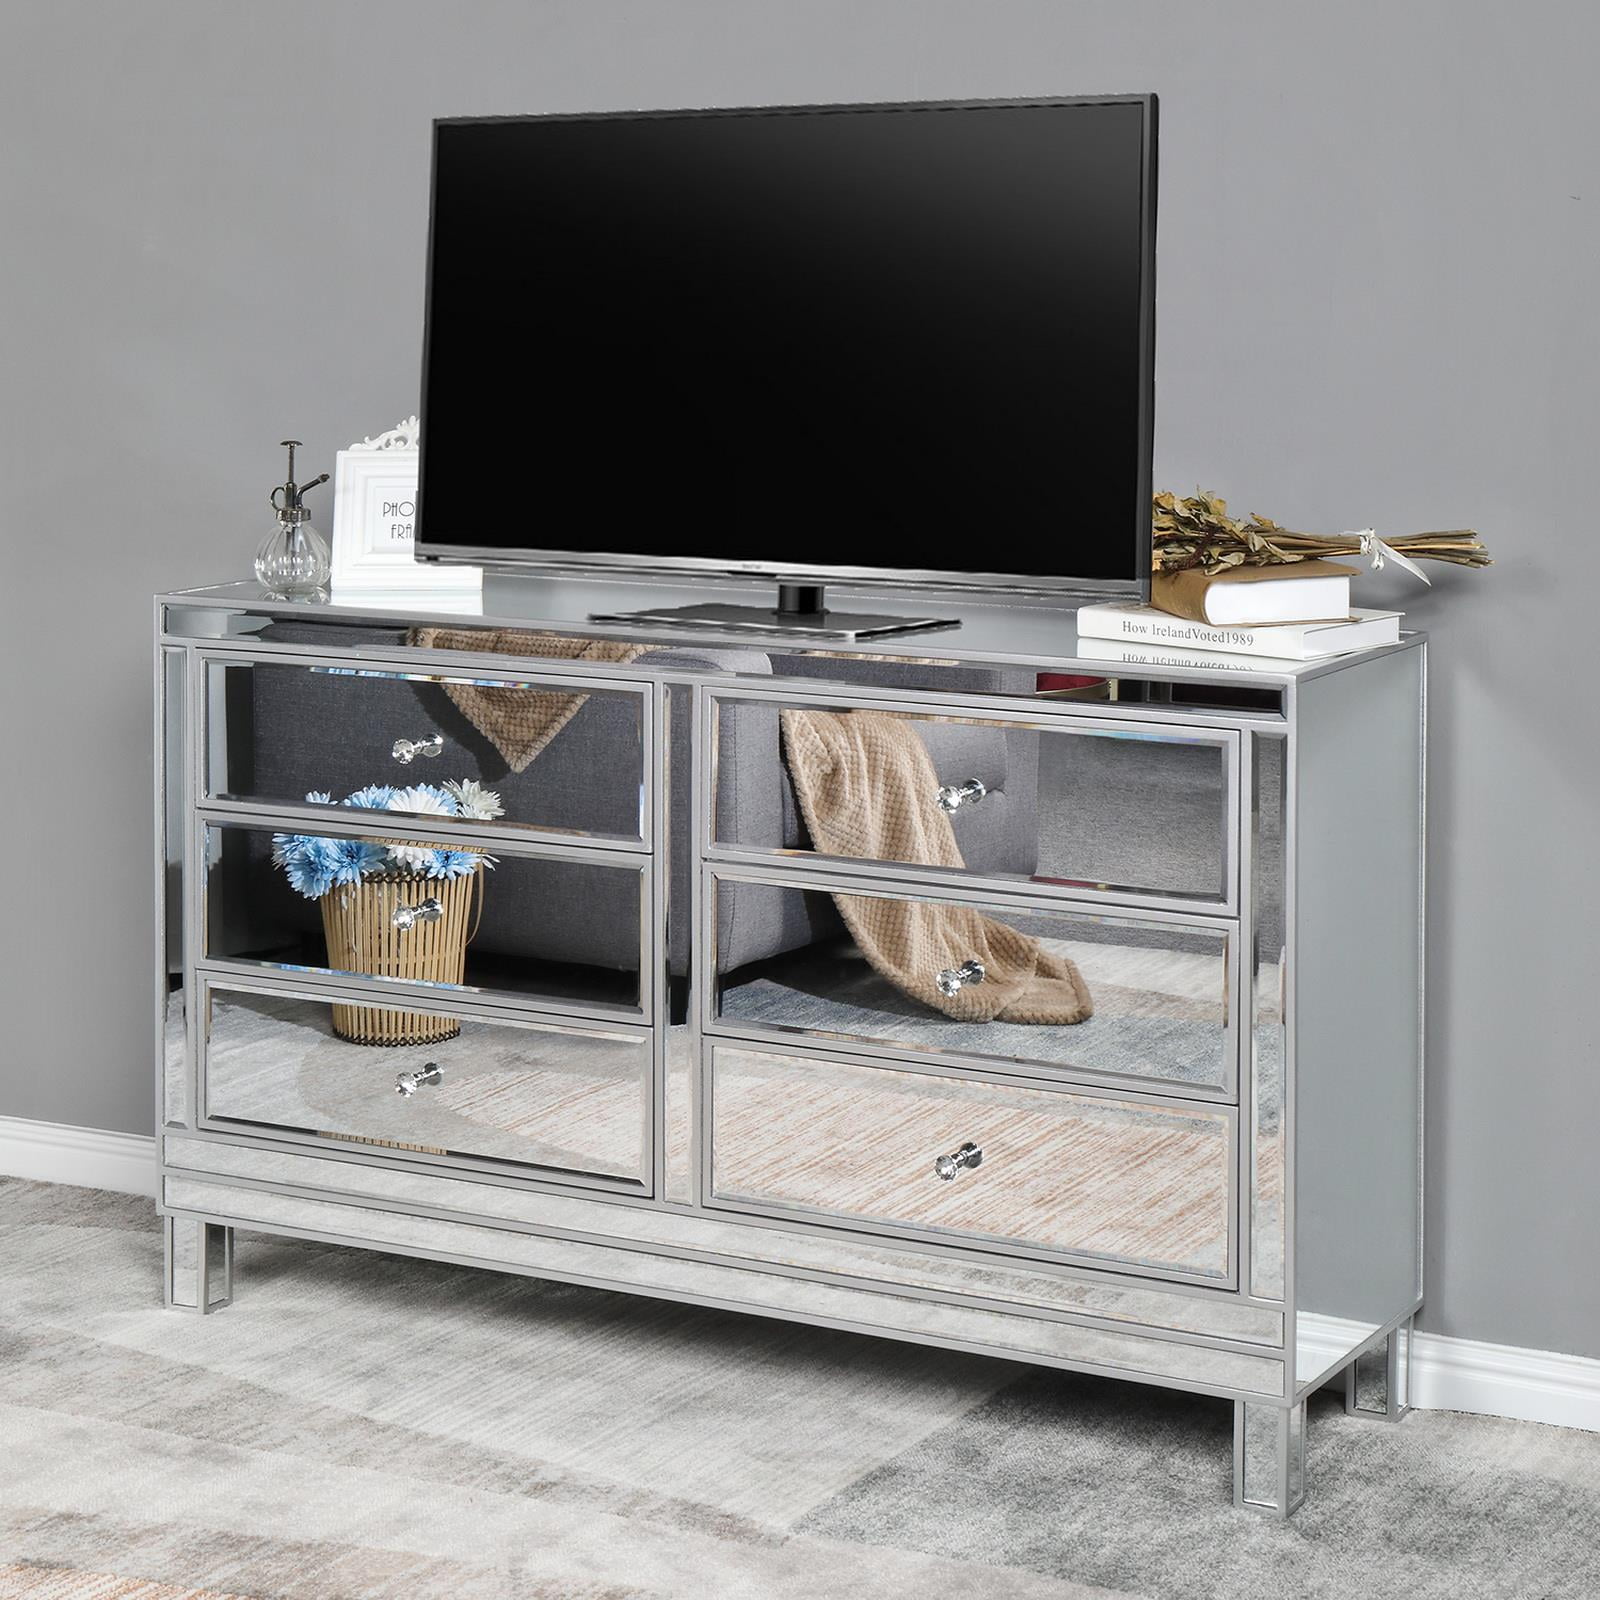 Large Mirrored Silver Television Stand TV Unit Furniture Glass Cabinet Home Chic 